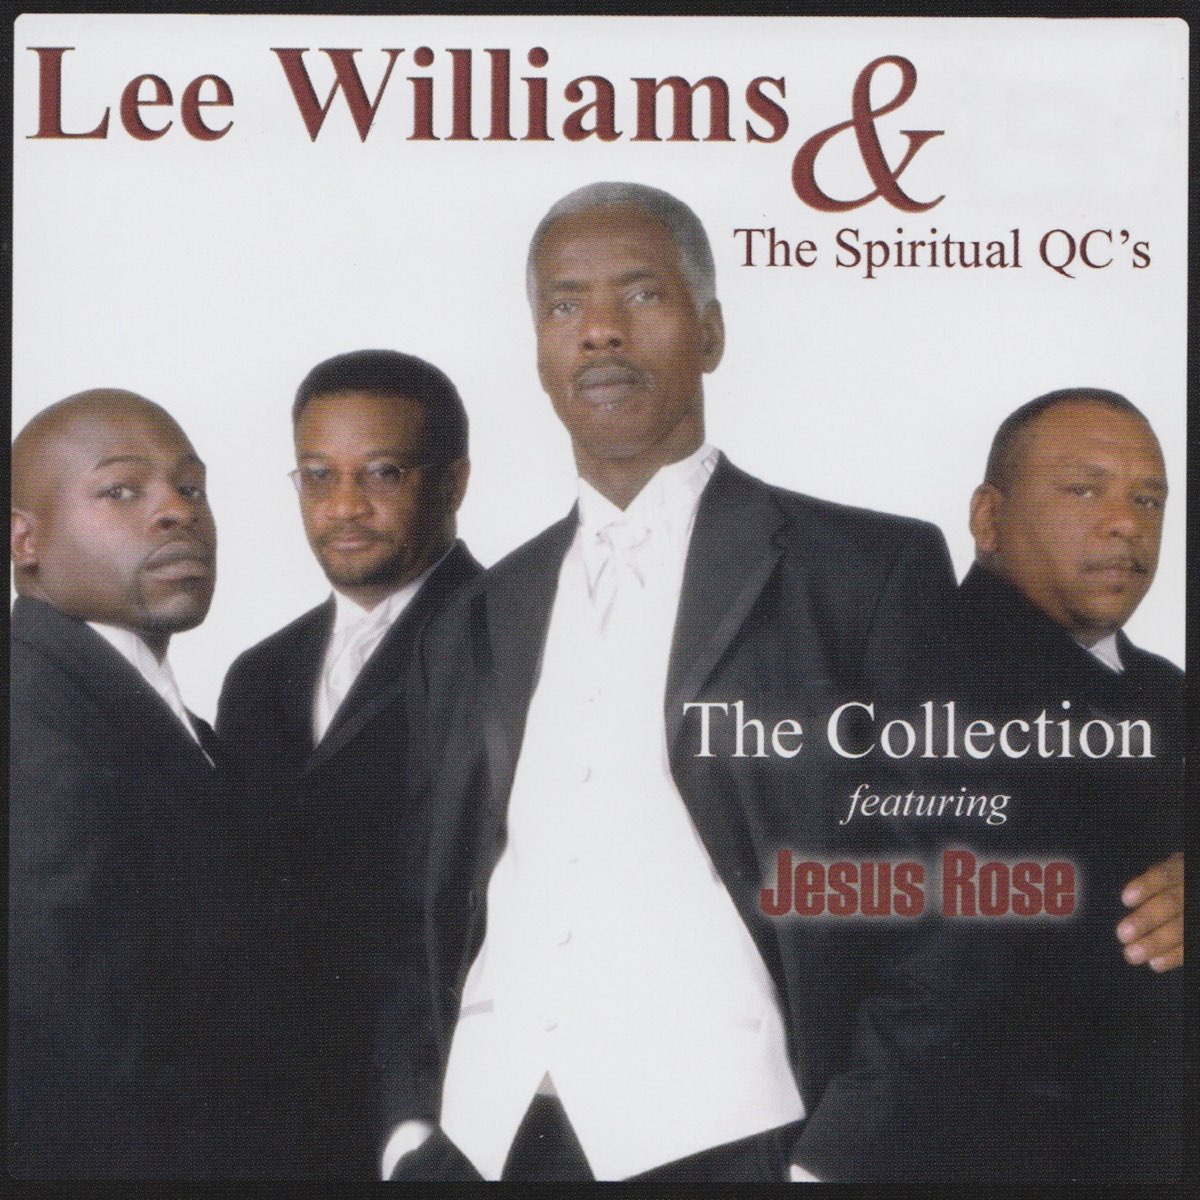 The Collection by Lee Williams & The Spiritual QC's on Apple Music